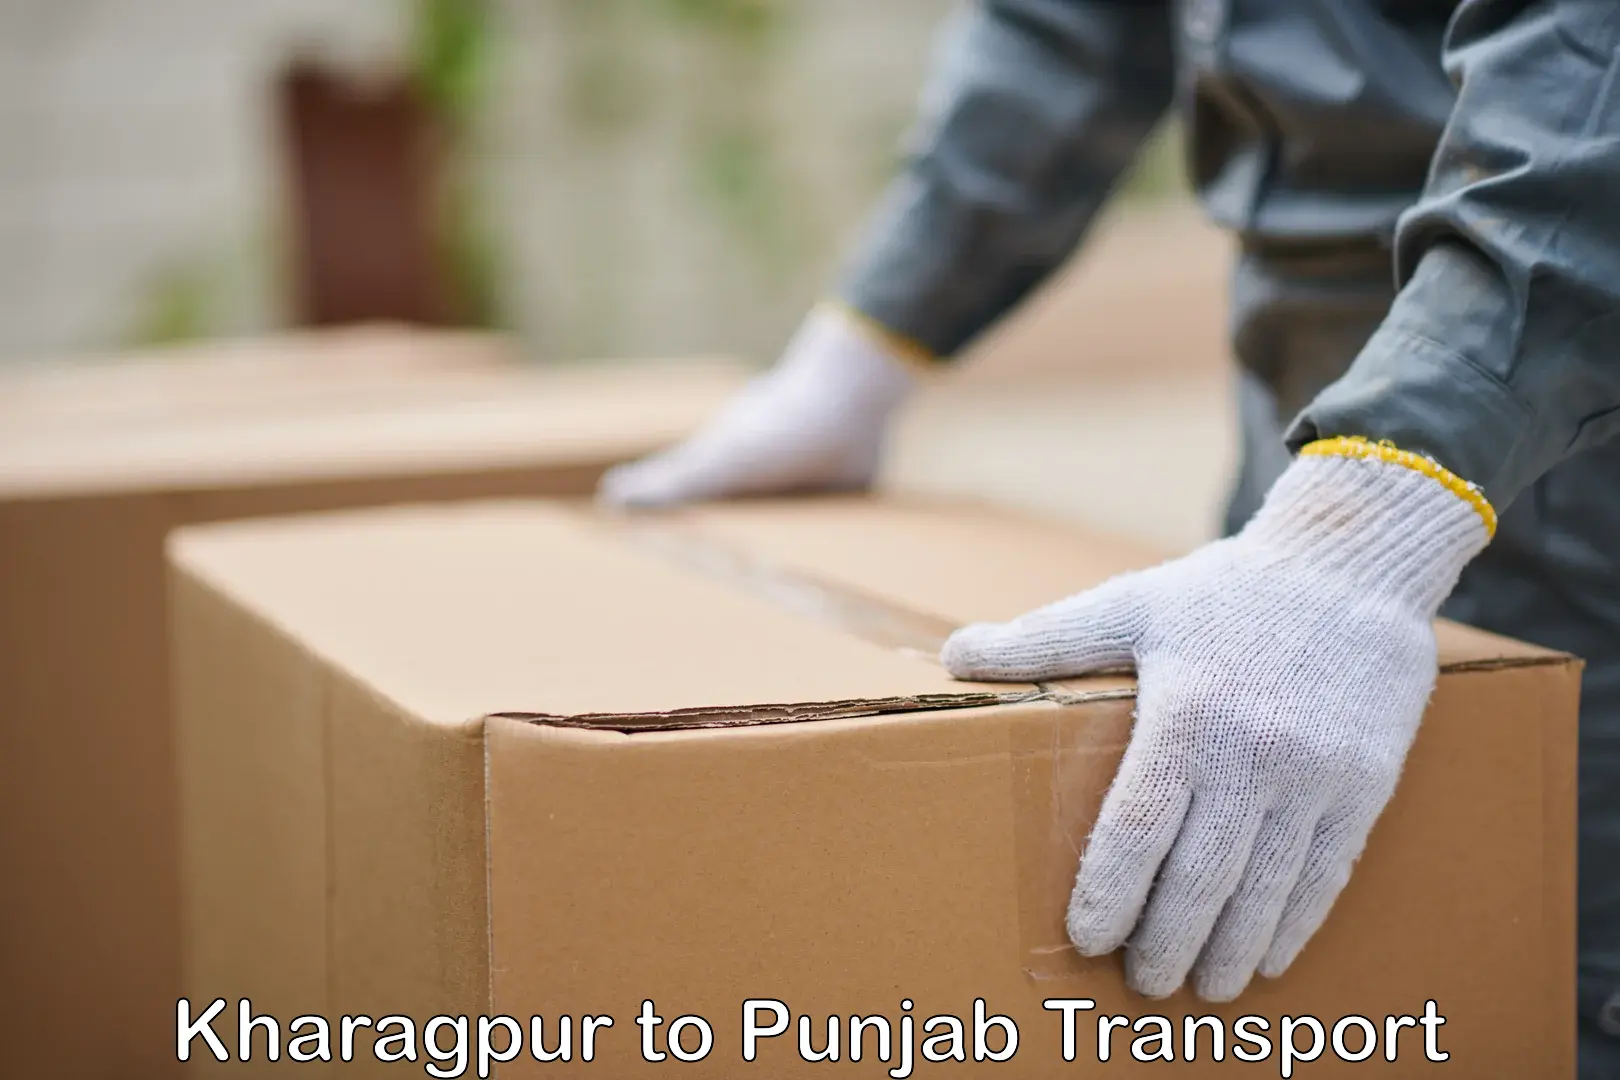 Delivery service Kharagpur to Punjab